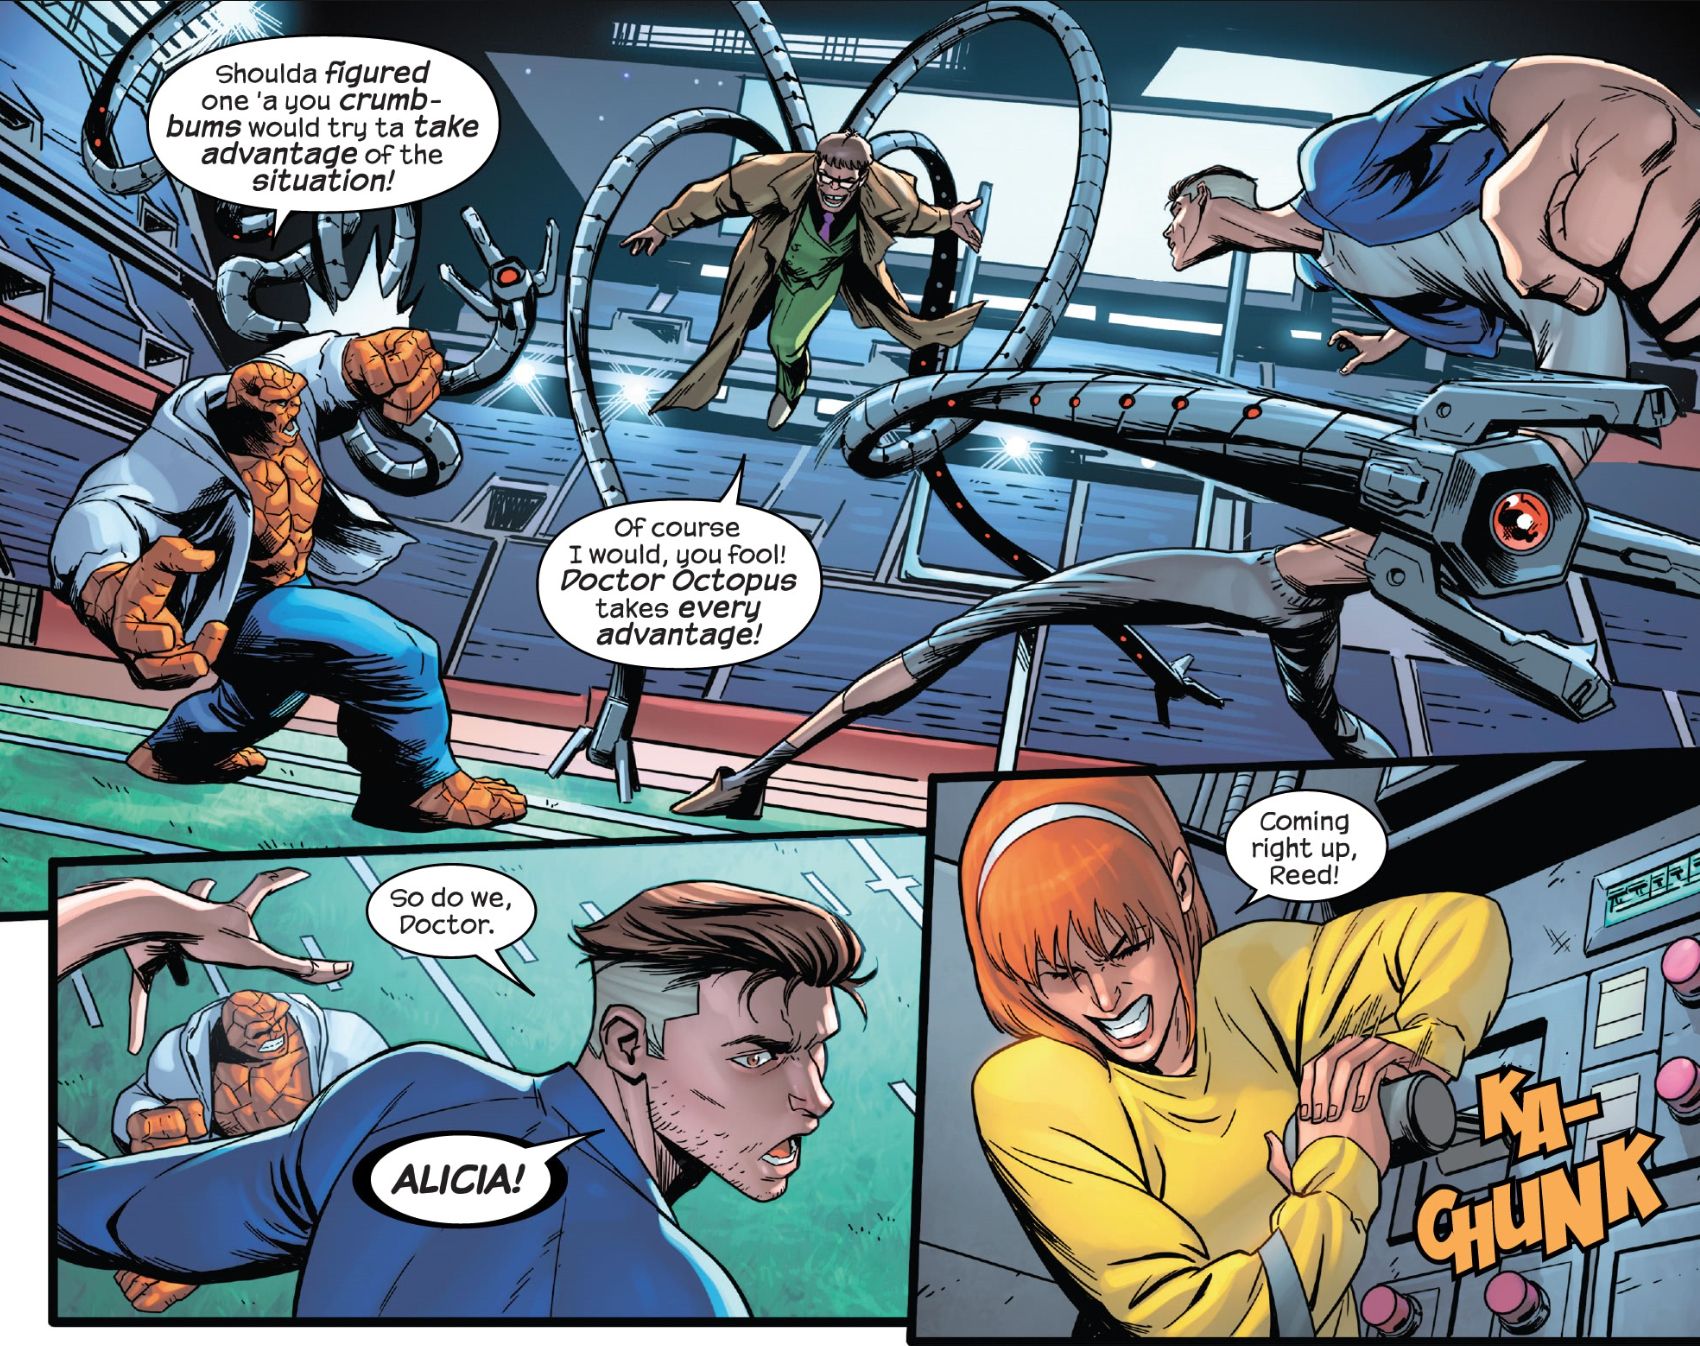 Mr Fantastic, The Thing, and Alicia square off against Doctor Octopus in an empty football field. At Reed's signal, Alicia throws the switch on a heavy piece of machinery.